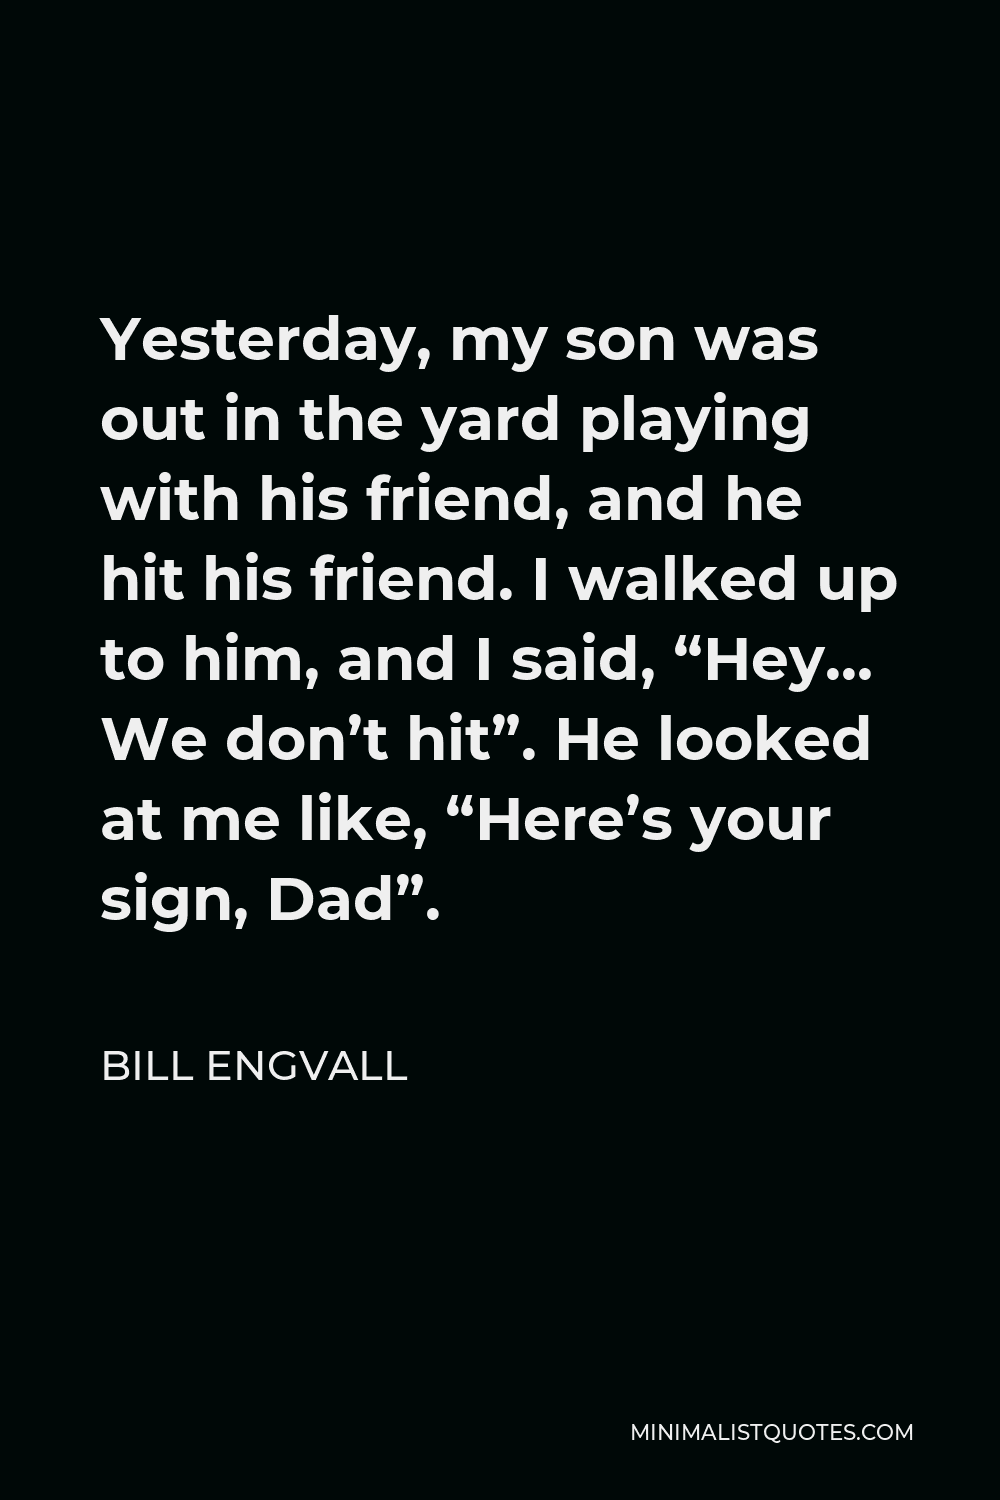 Bill Engvall Quote - Yesterday, my son was out in the yard playing with his friend, and he hit his friend. I walked up to him, and I said, “Hey… We don’t hit”. He looked at me like, “Here’s your sign, Dad”.